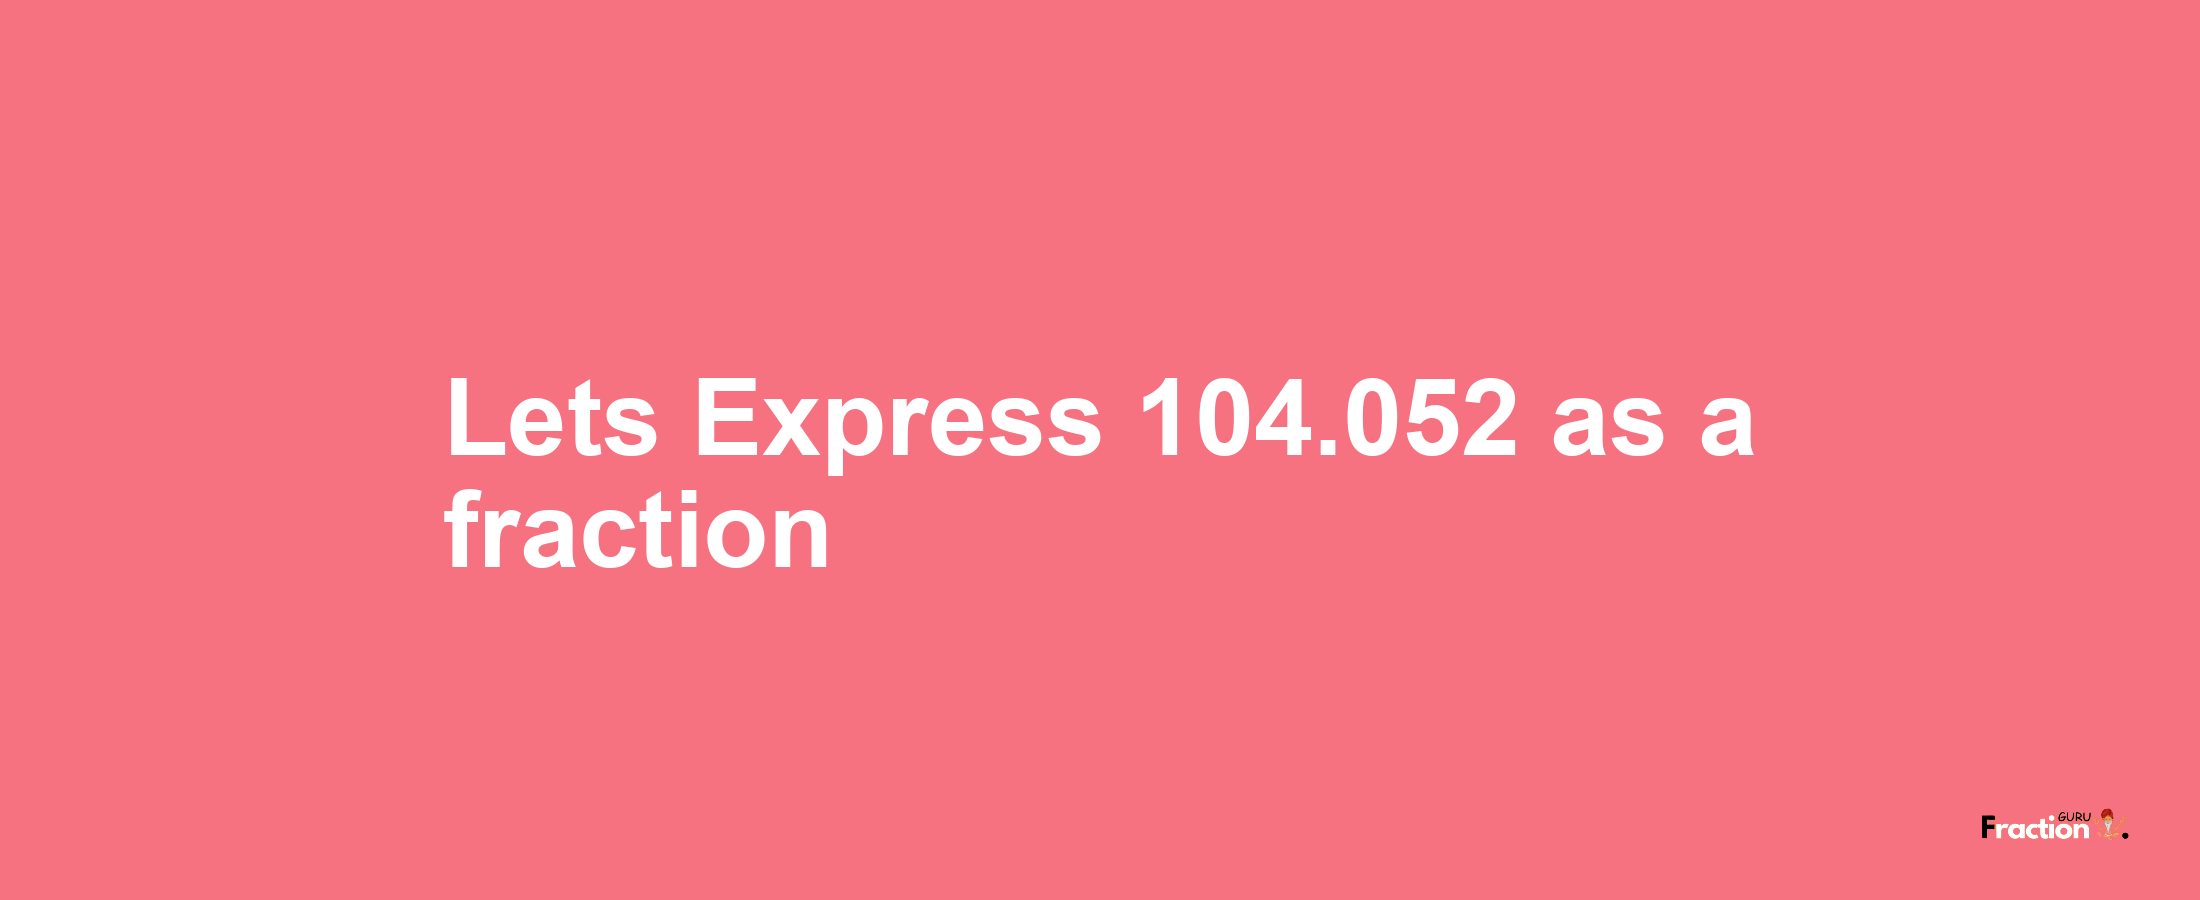 Lets Express 104.052 as afraction